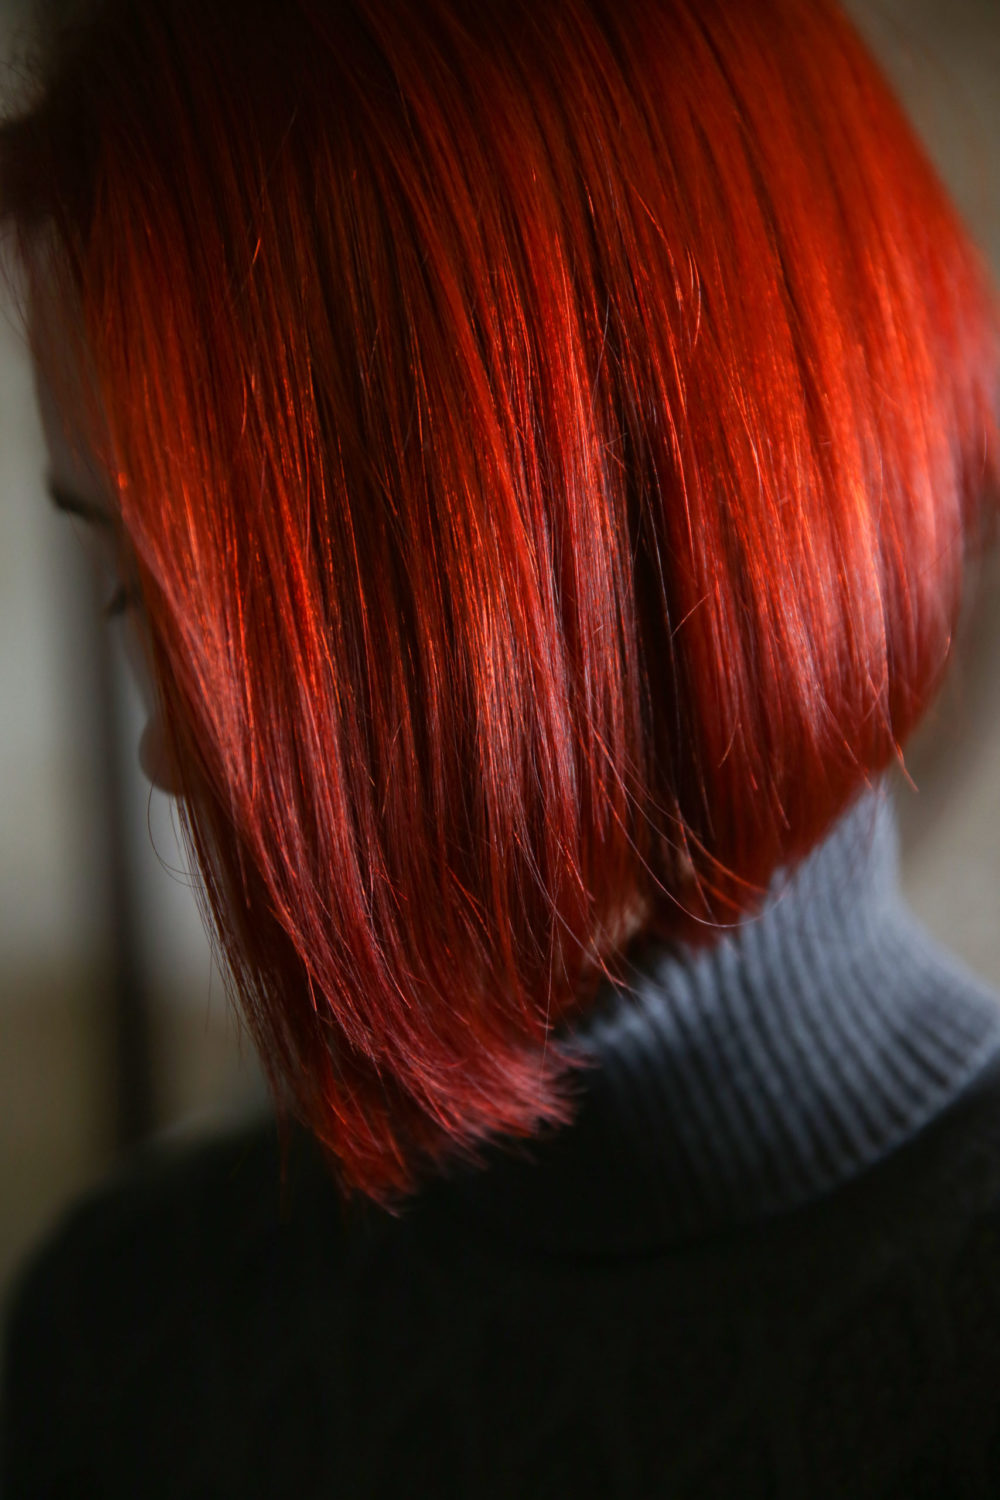 True Red hair color, one of the best for pale skin, on a woman in a turtleneck